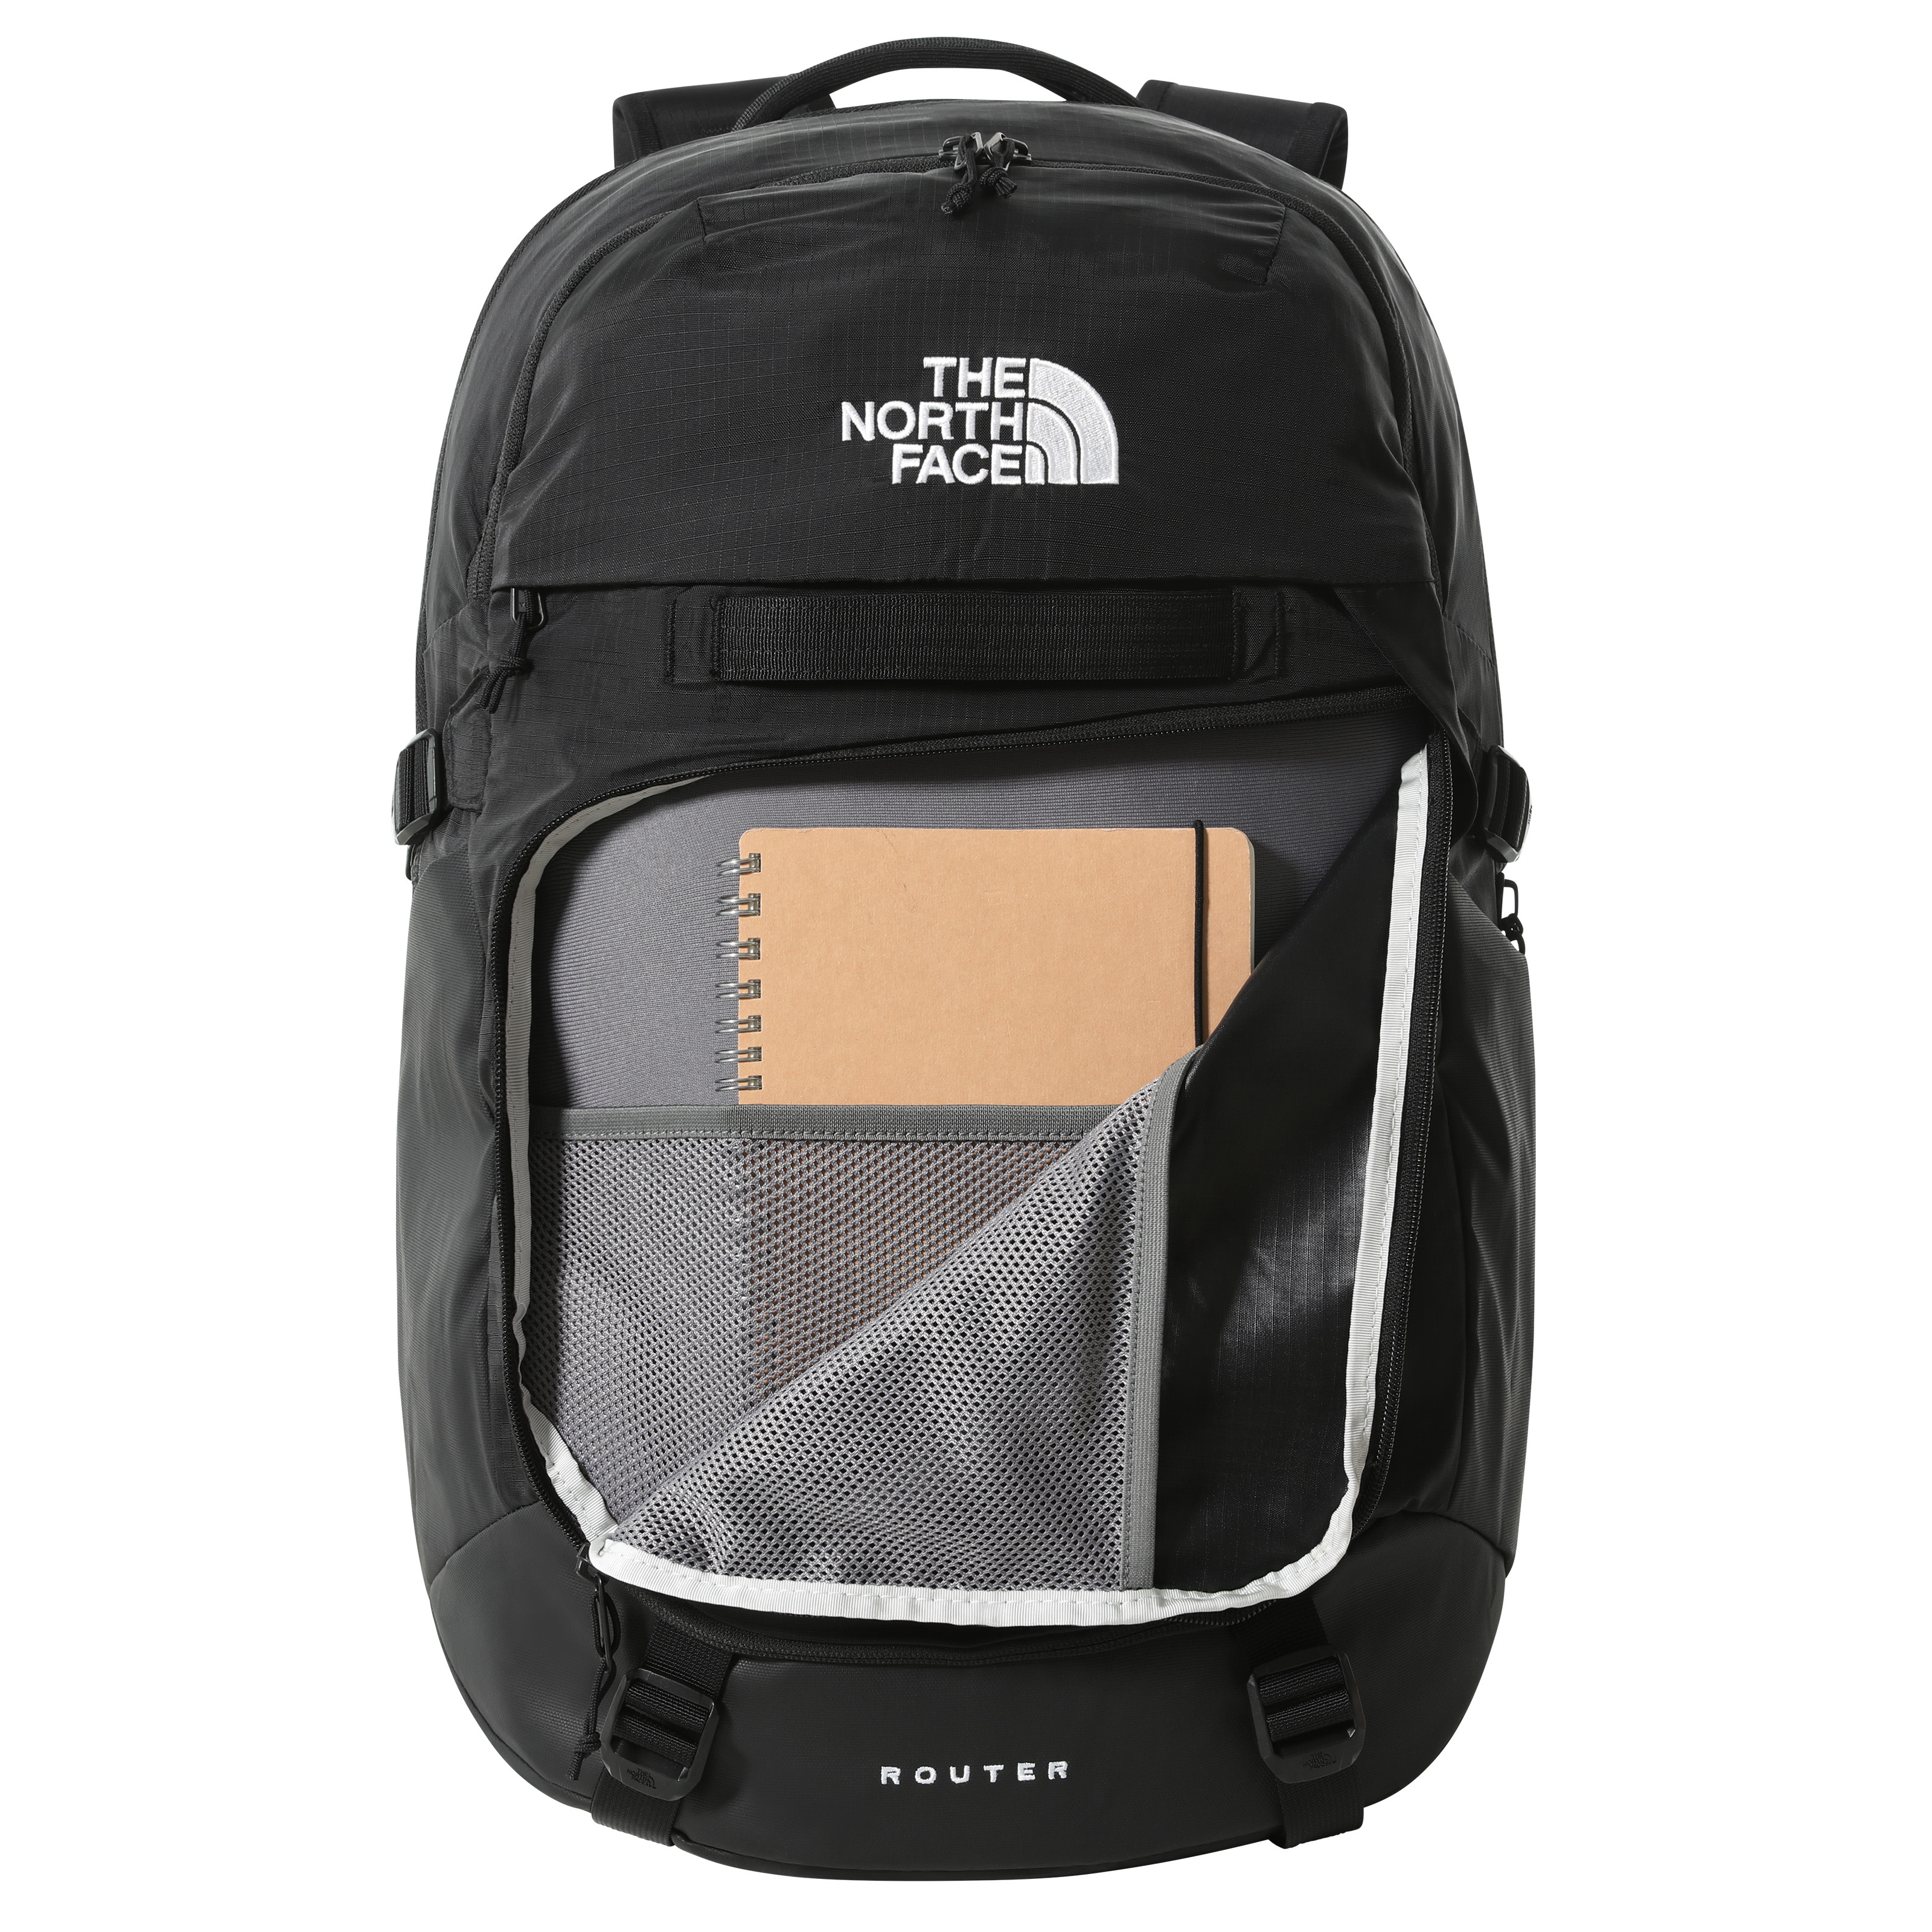 Router Tnf Blk/Tnf Blk | Buy Router Tnf Blk/Tnf Blk here | Outnorth